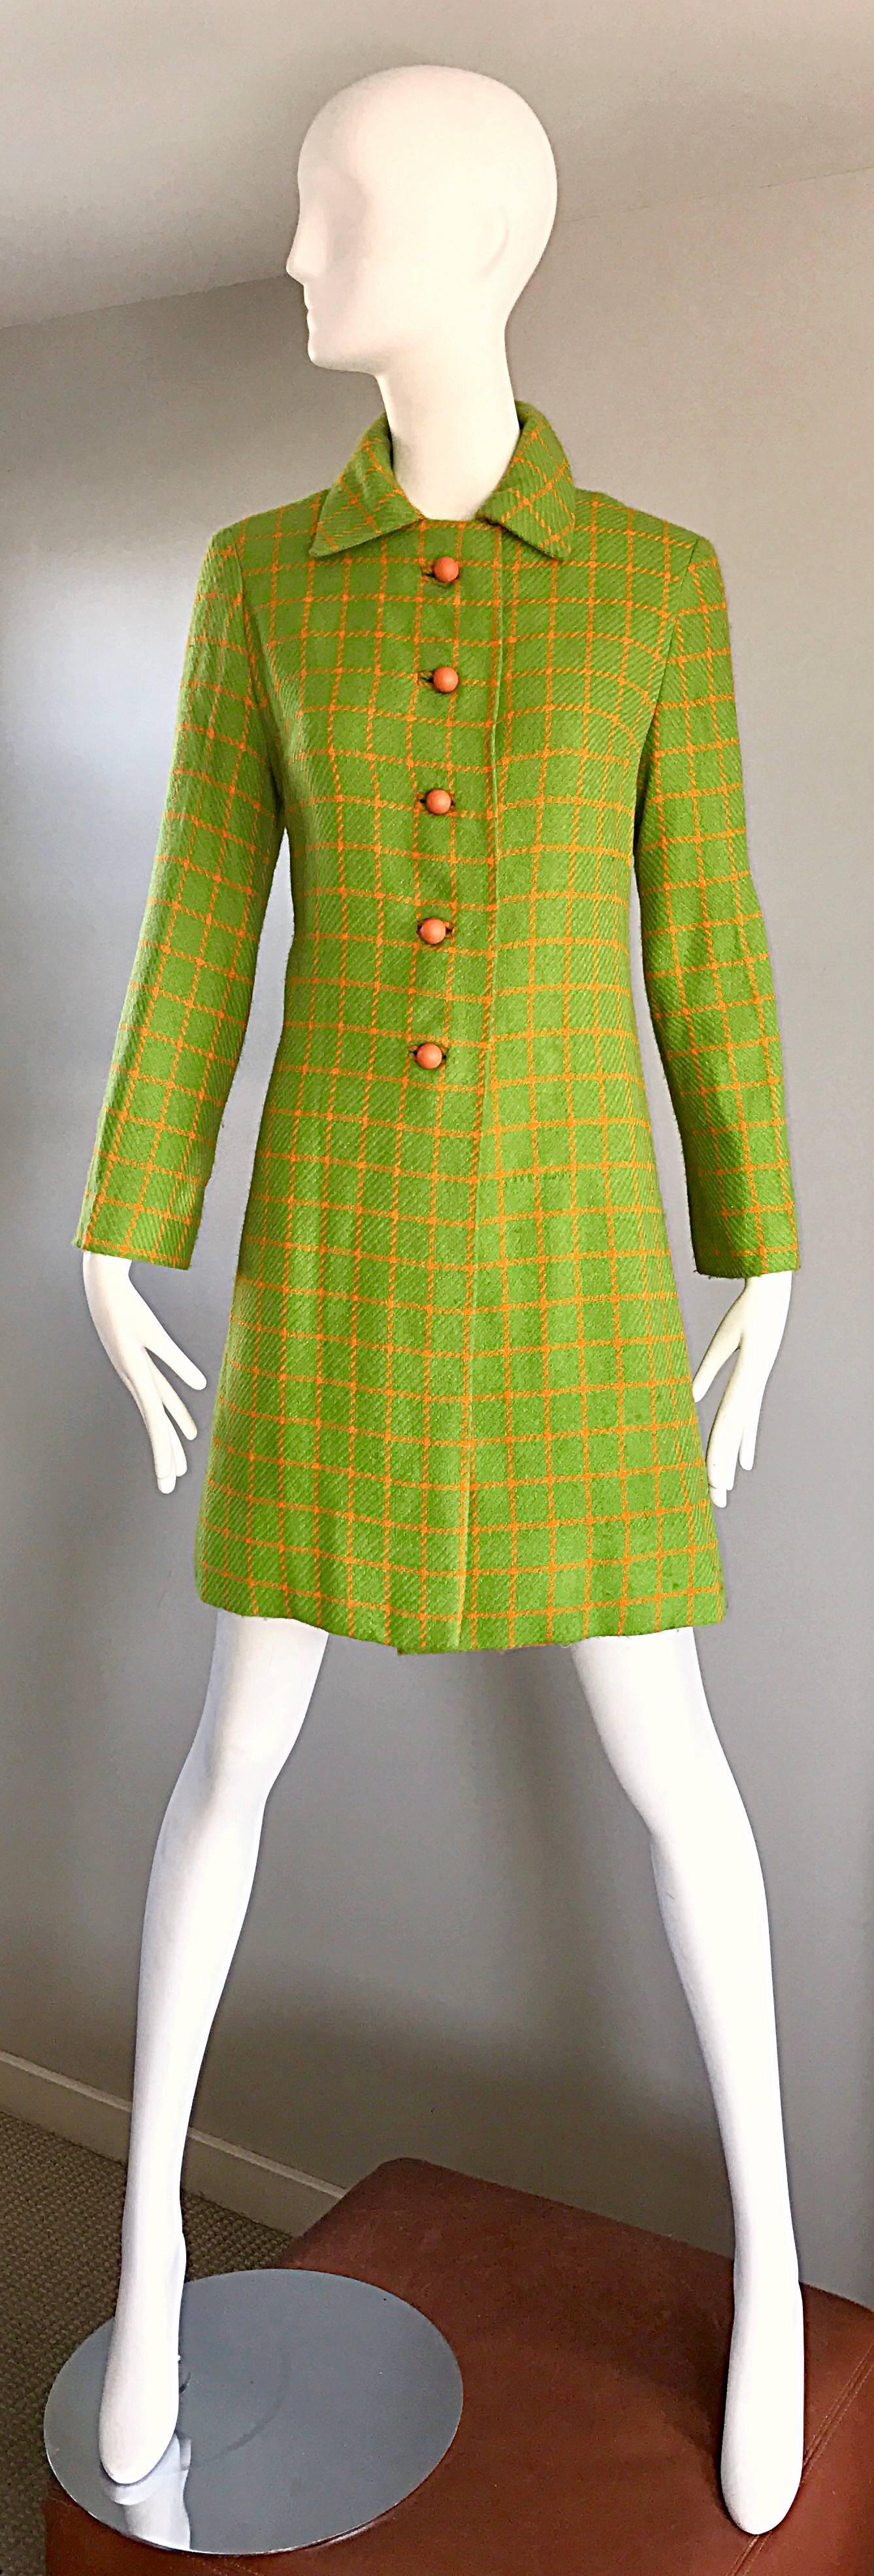 1960s Neon Lime Green and Orange Checkered Vintage 60s Wool Swing Jacket Coat 3